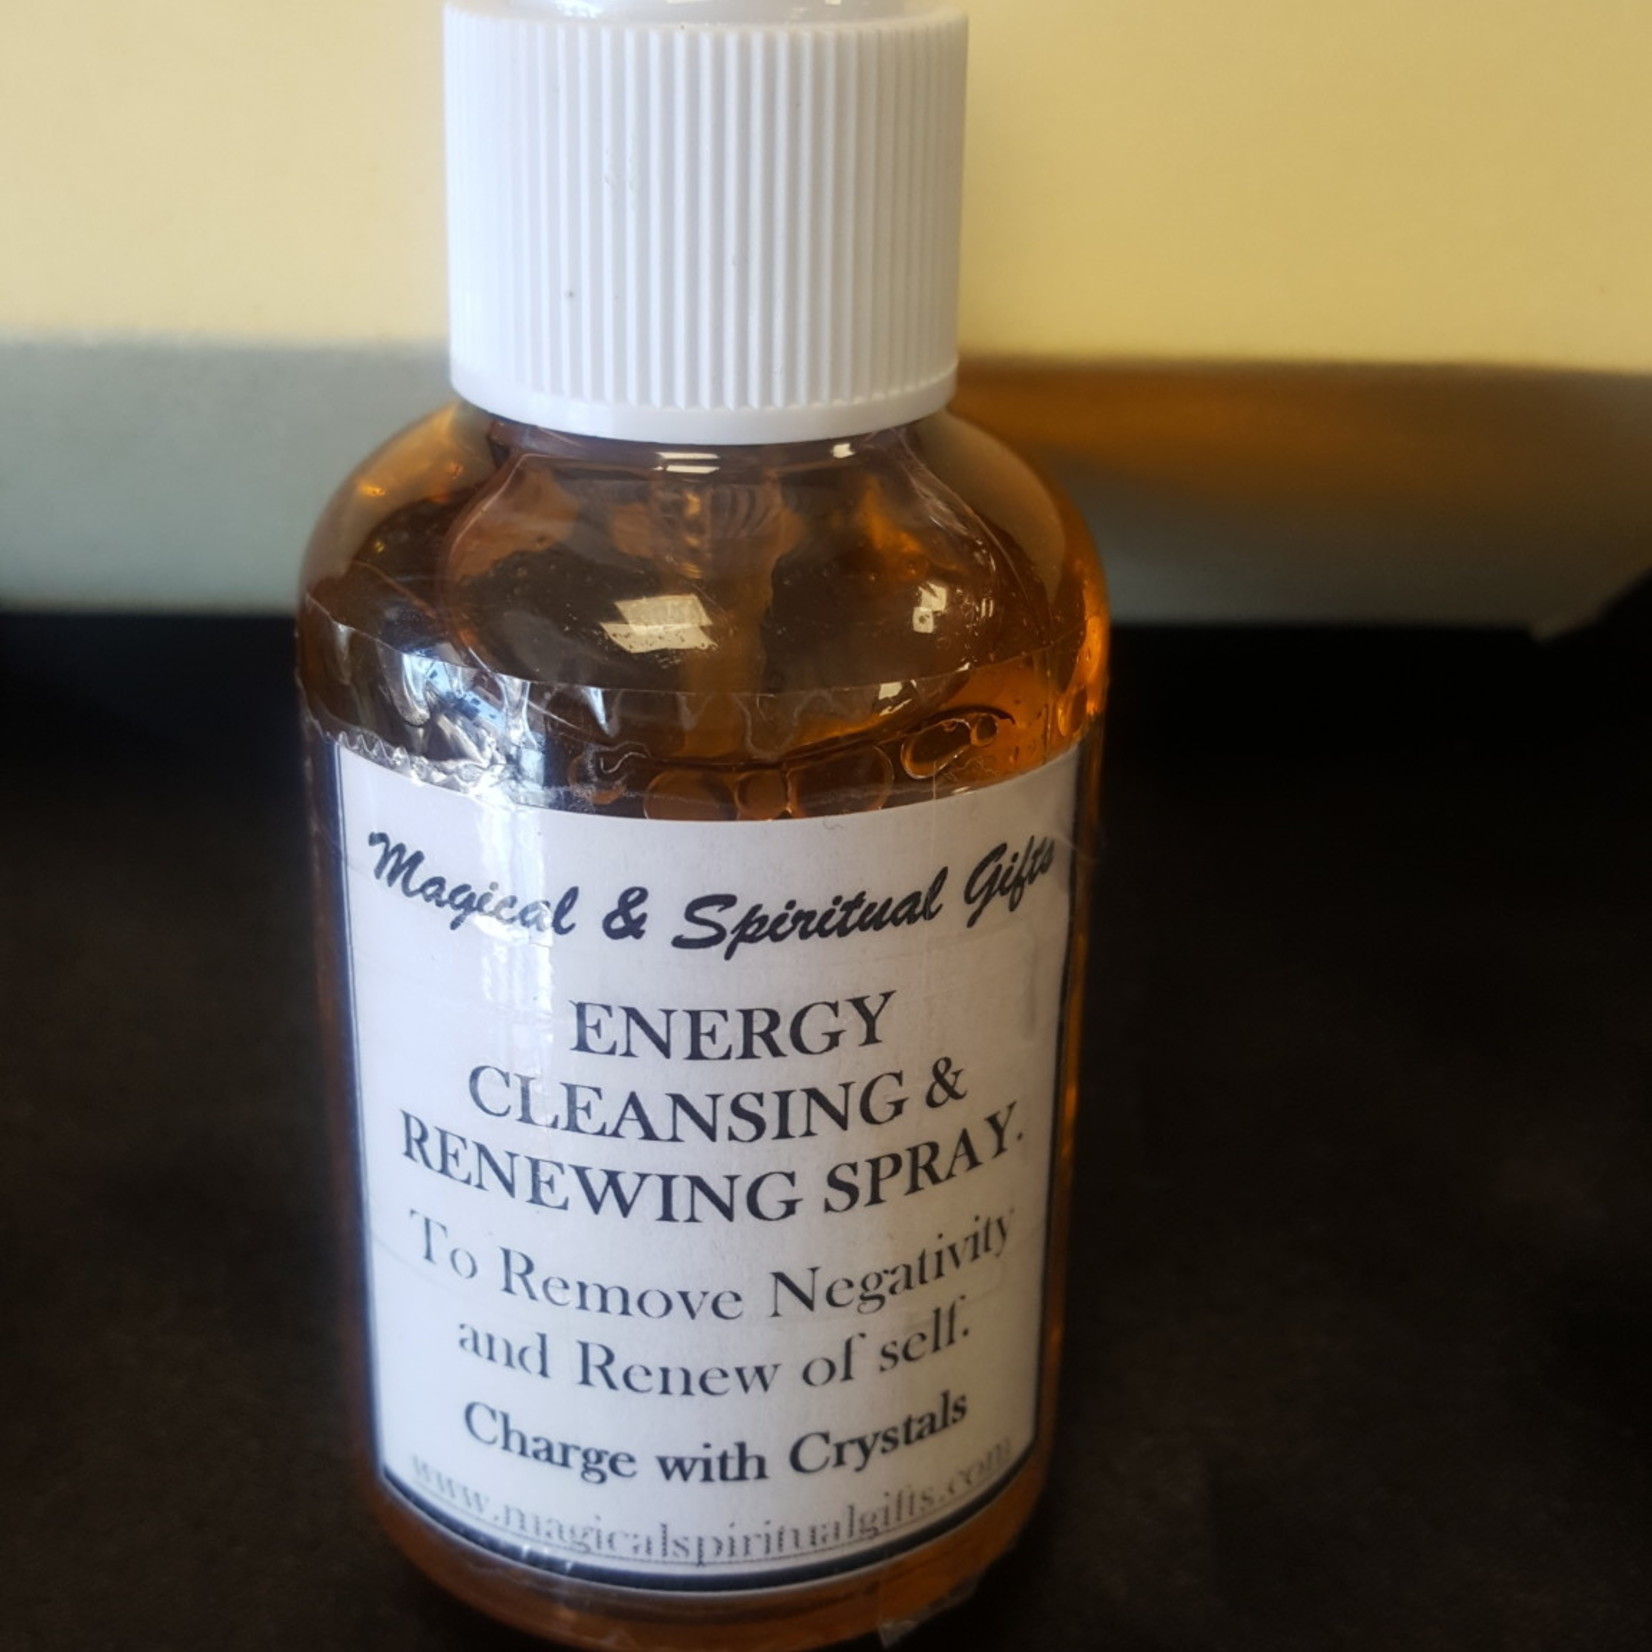 Energy Cleansing & Renewing Spary 2oz